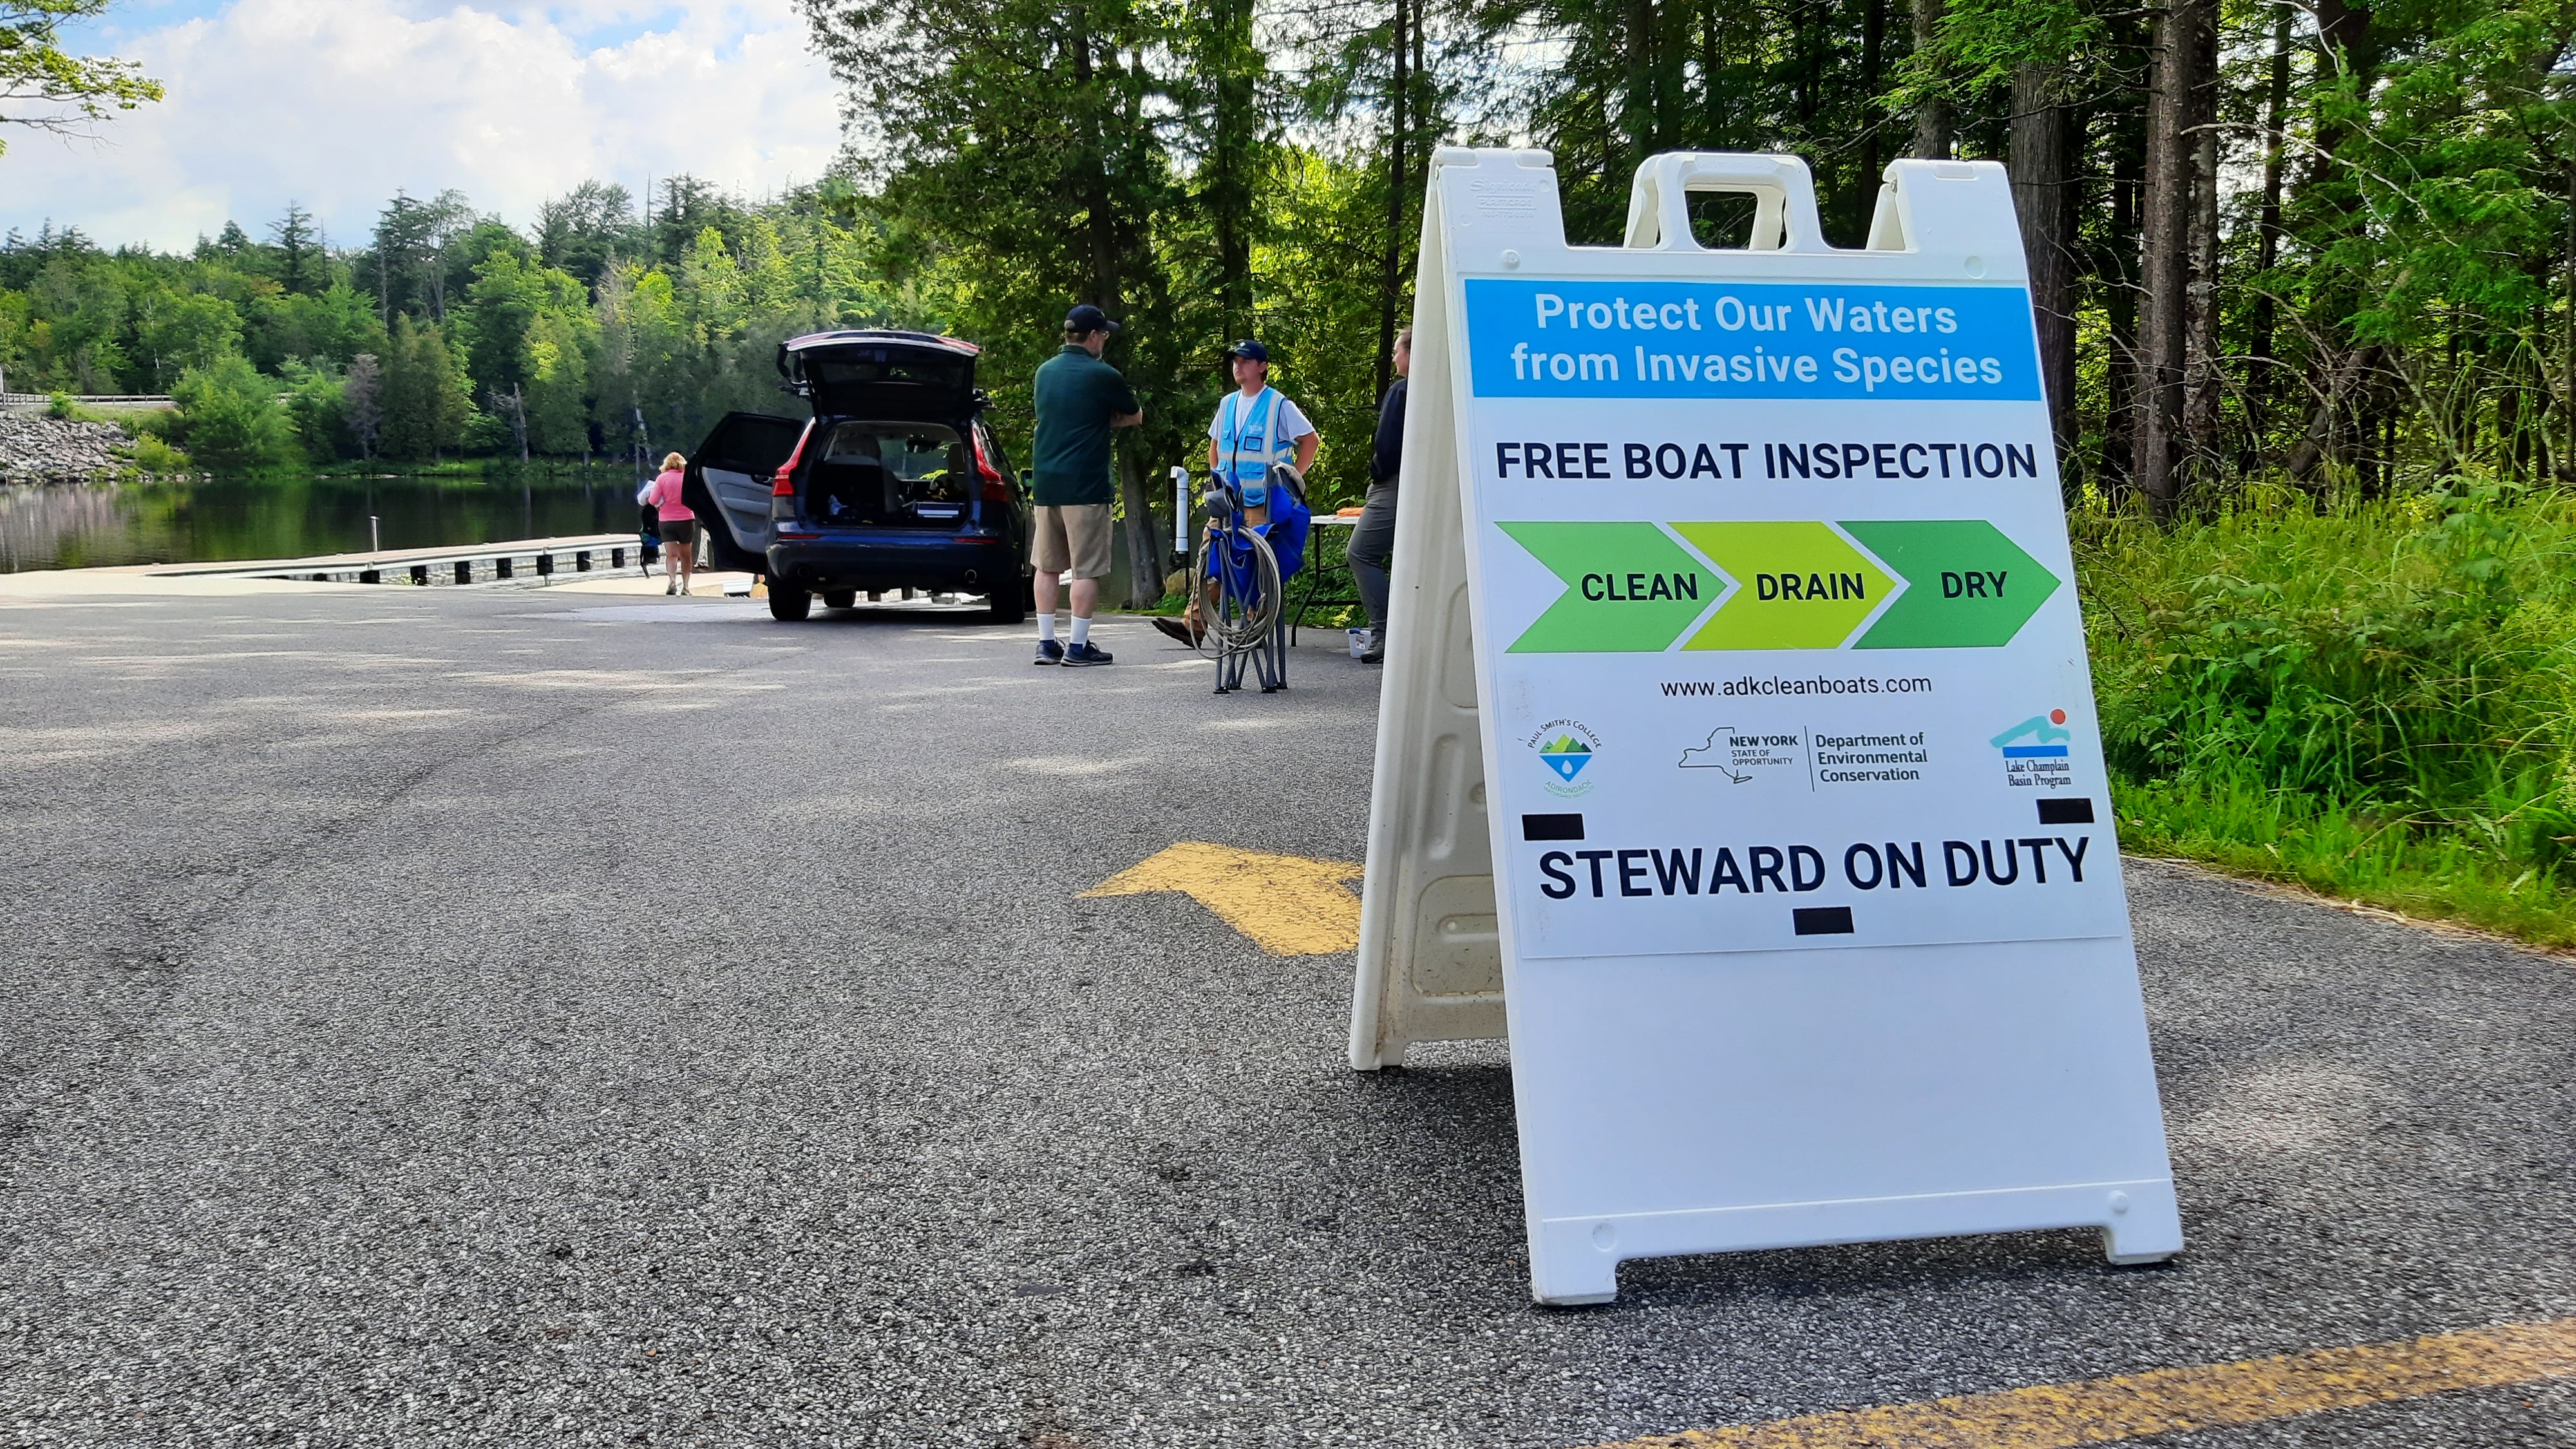 A watershed steward speaks with boaters